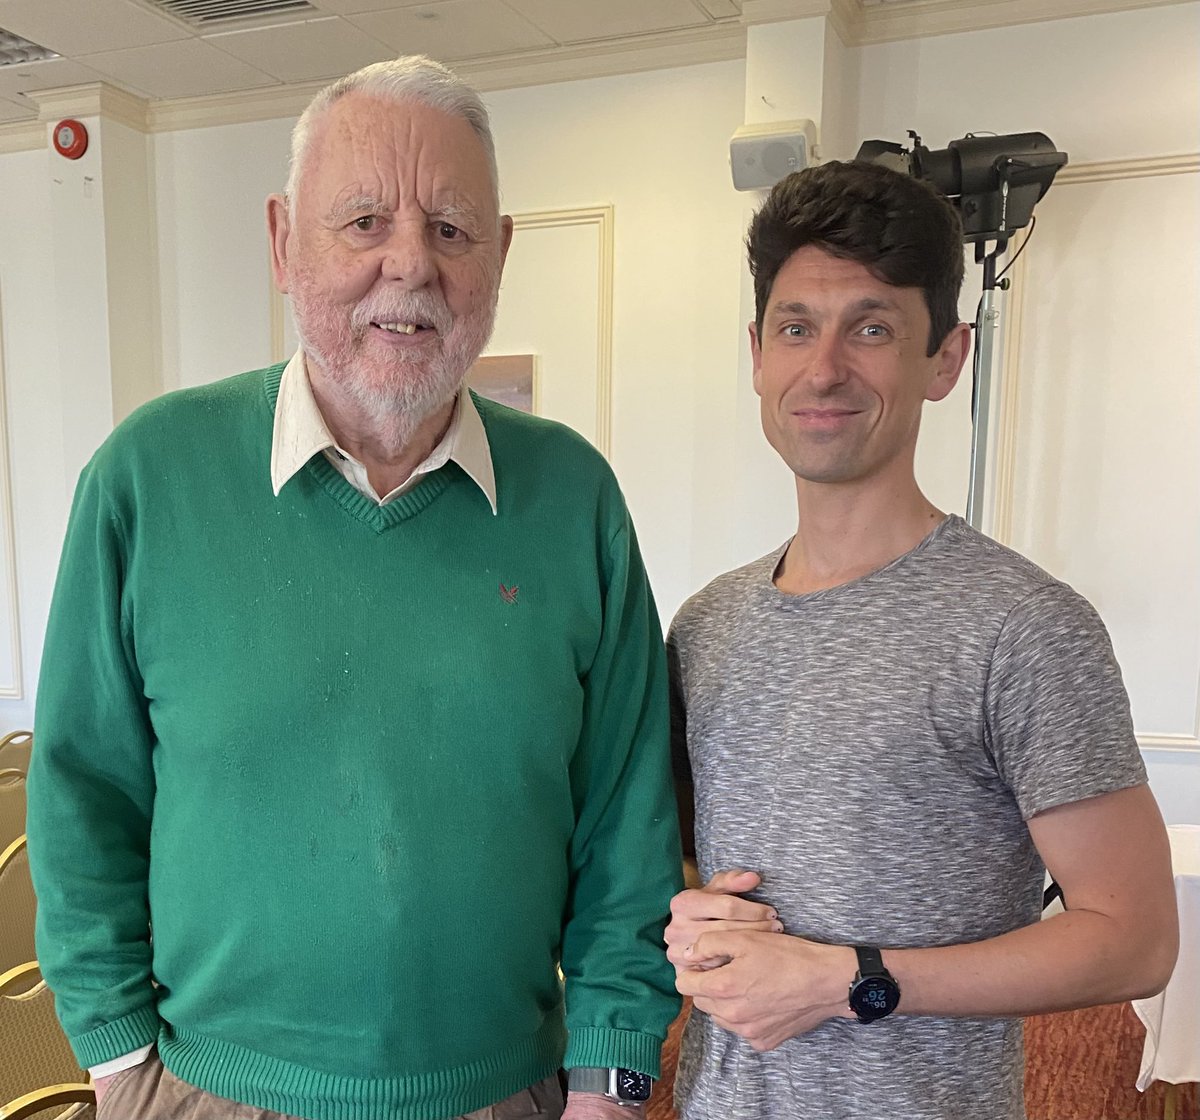 A big pleasure to be interviewed by Terry Waite today @GuernseyLitFest